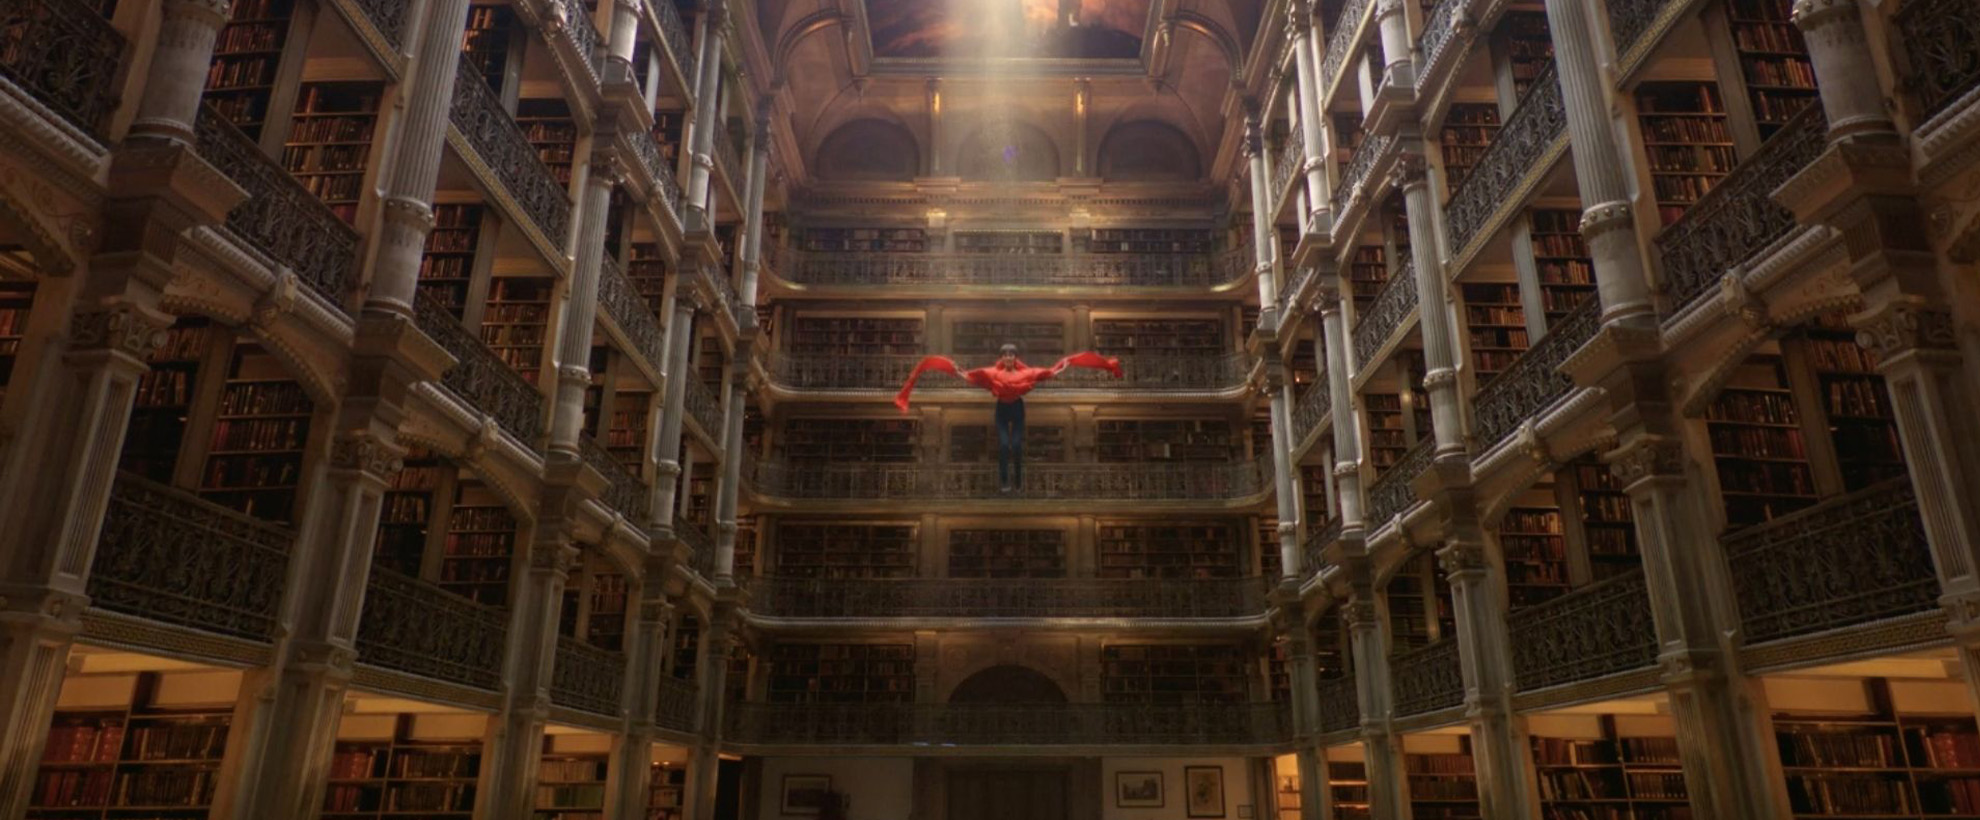 A boy floating down from the ceiling of a large columned room. There is light spilling from a hole in the ceiling.